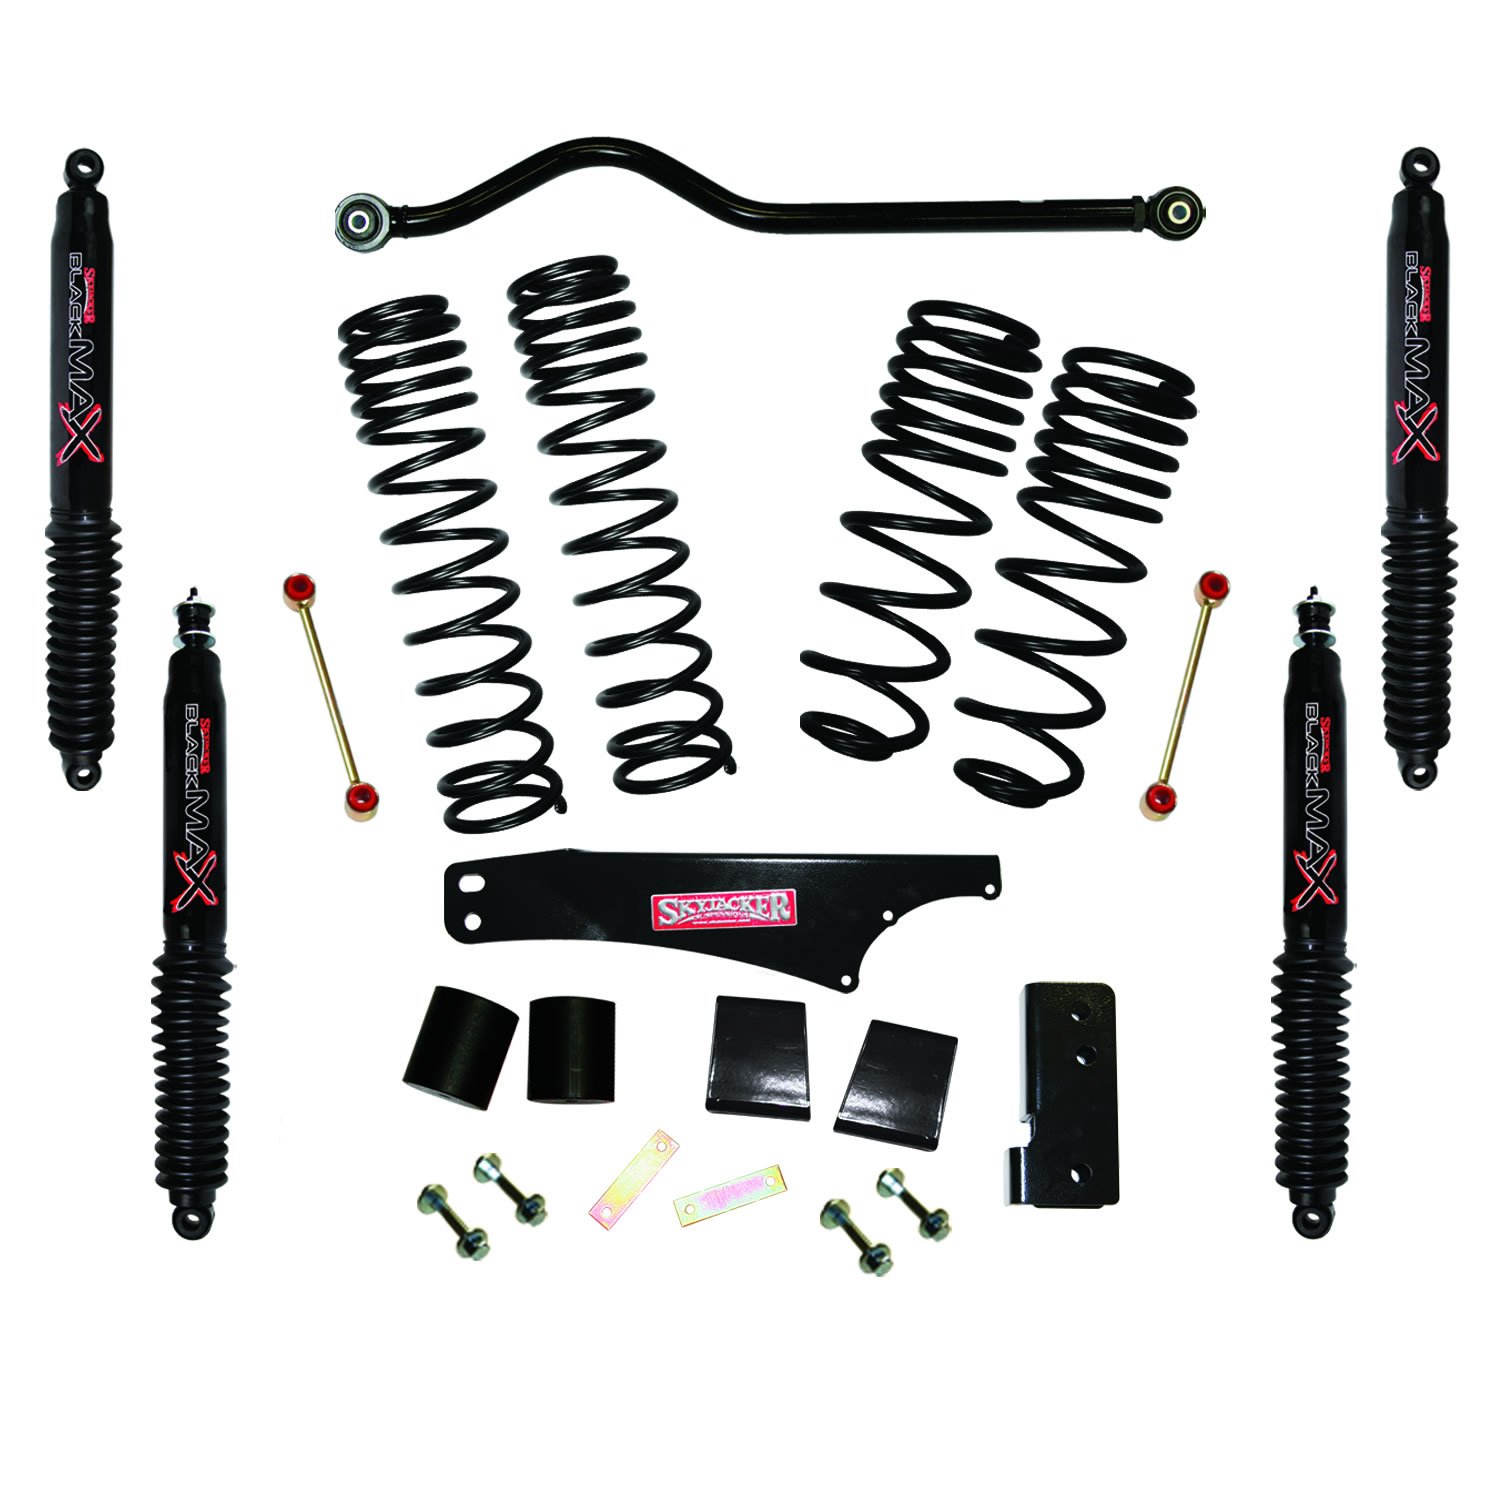 JK35BPBLT Front and Rear Suspension Lift Kit, Lift Amount: 3.5 in. Front/3.5 in. Rear